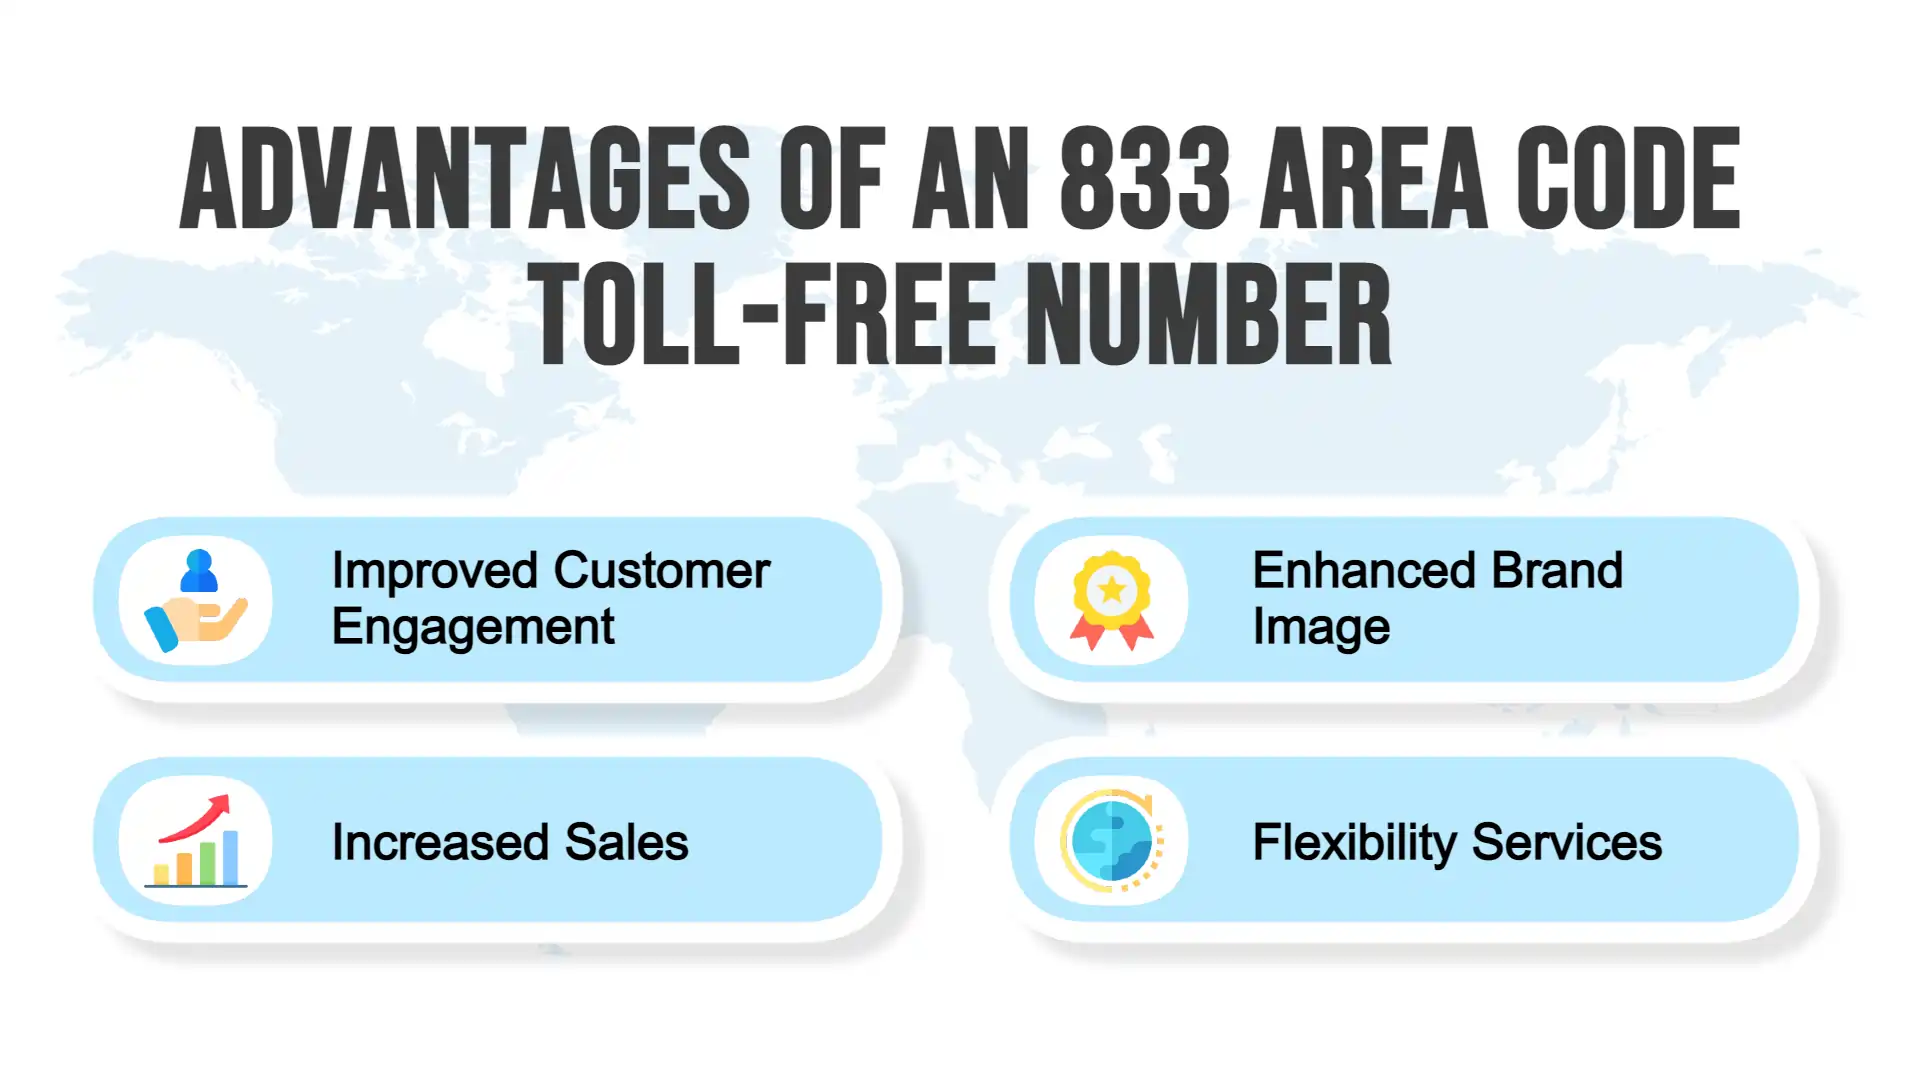 Advantages of an 833 Area Code Toll-Free Number